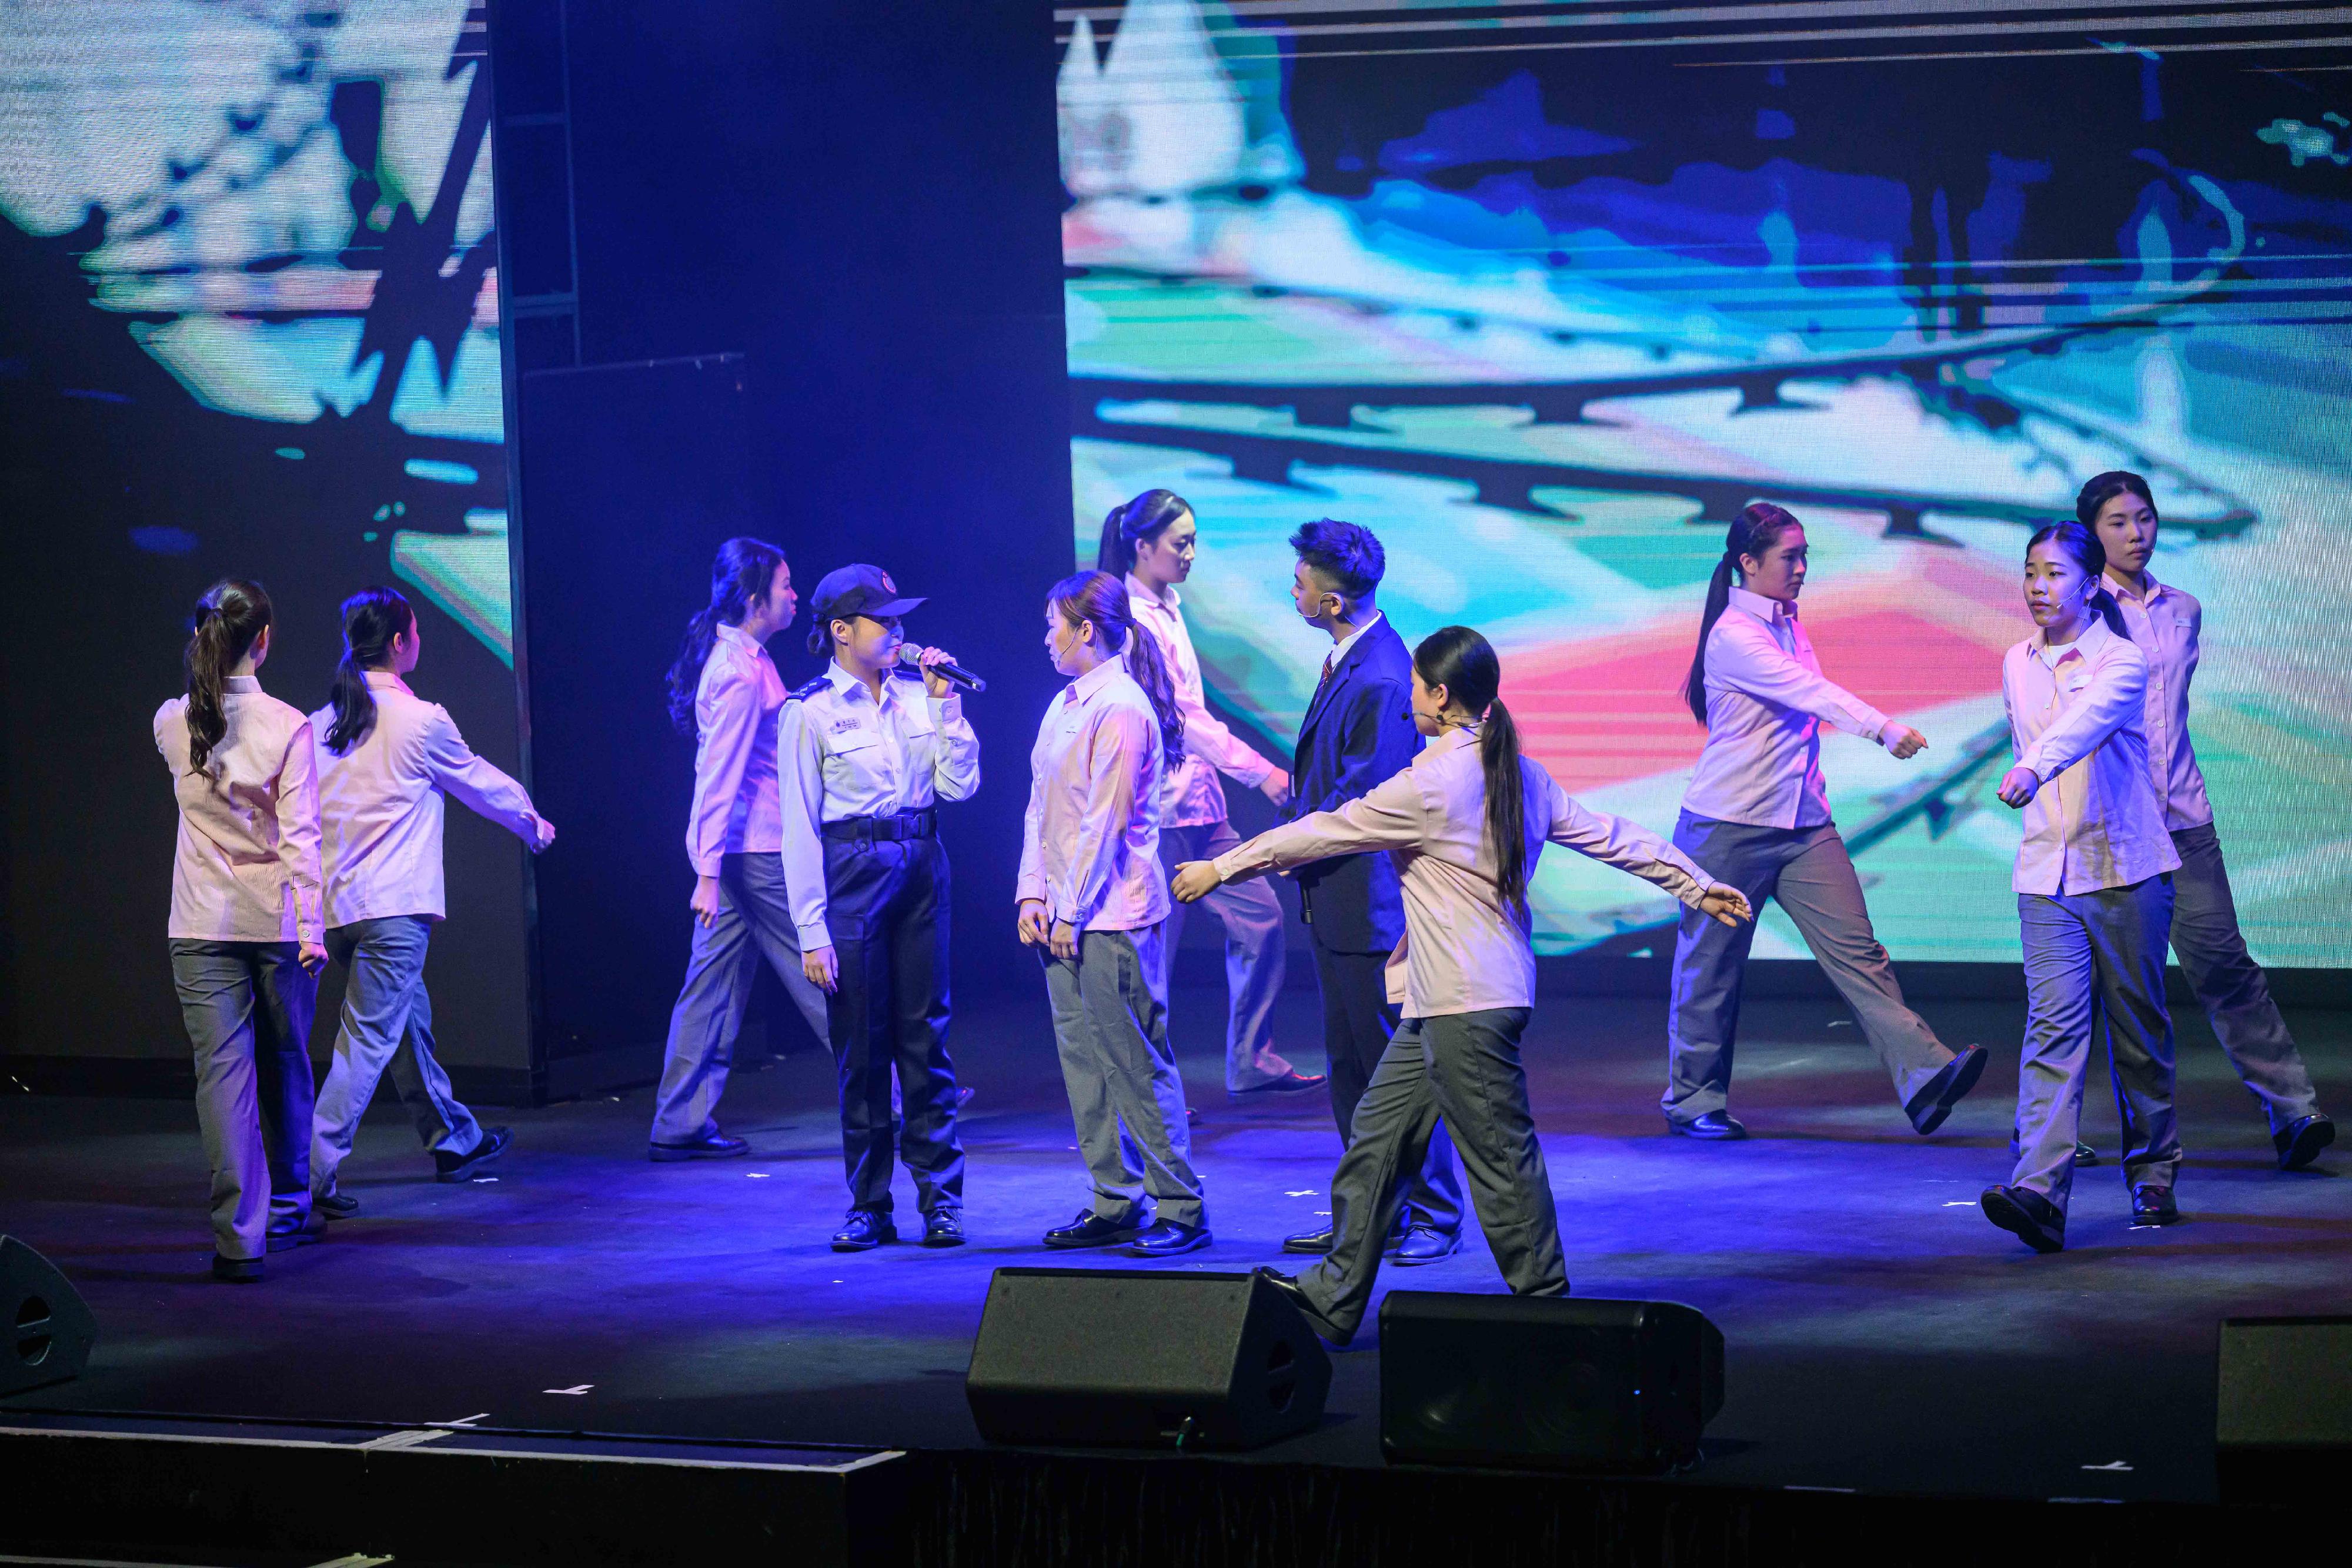 The Correctional Services Department and the Chinese Manufacturers' Association of Hong Kong jointly organised a youth musical drama, "Life Revitalisation Go Go Goal!", at Queen Elizabeth Stadium today (January 26) to promote law-abiding and rehabilitation messages. Photo shows the spectacular performances in the musical drama.